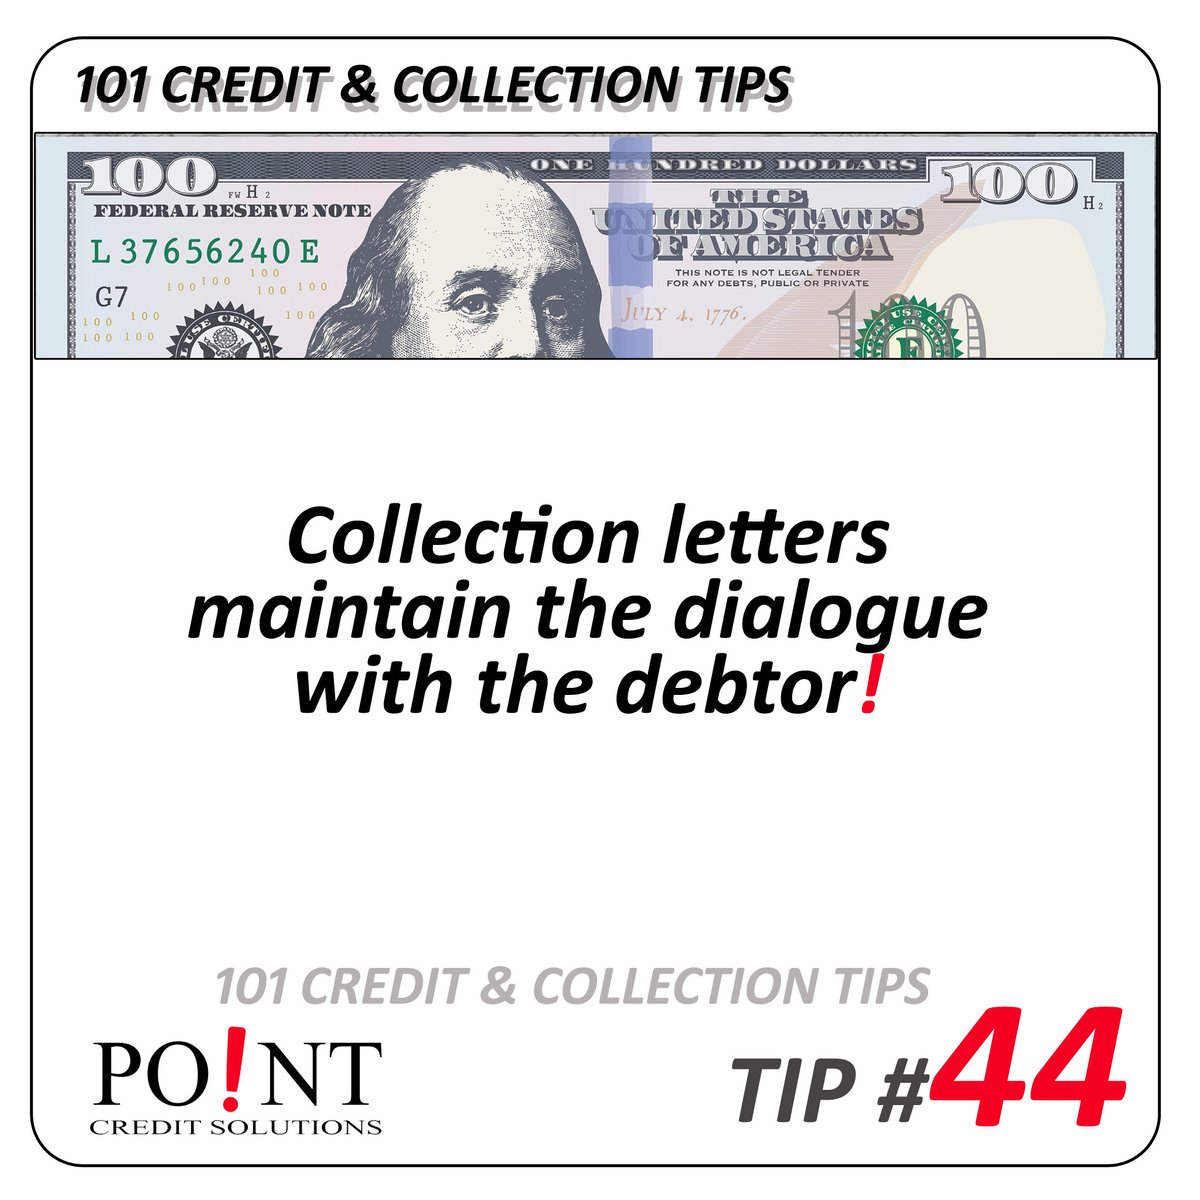 Find more tips here -> zcu.io/PmSO
#PointCredit #CollectionTips #Debt #DebtCollection #Communication #Dialogue